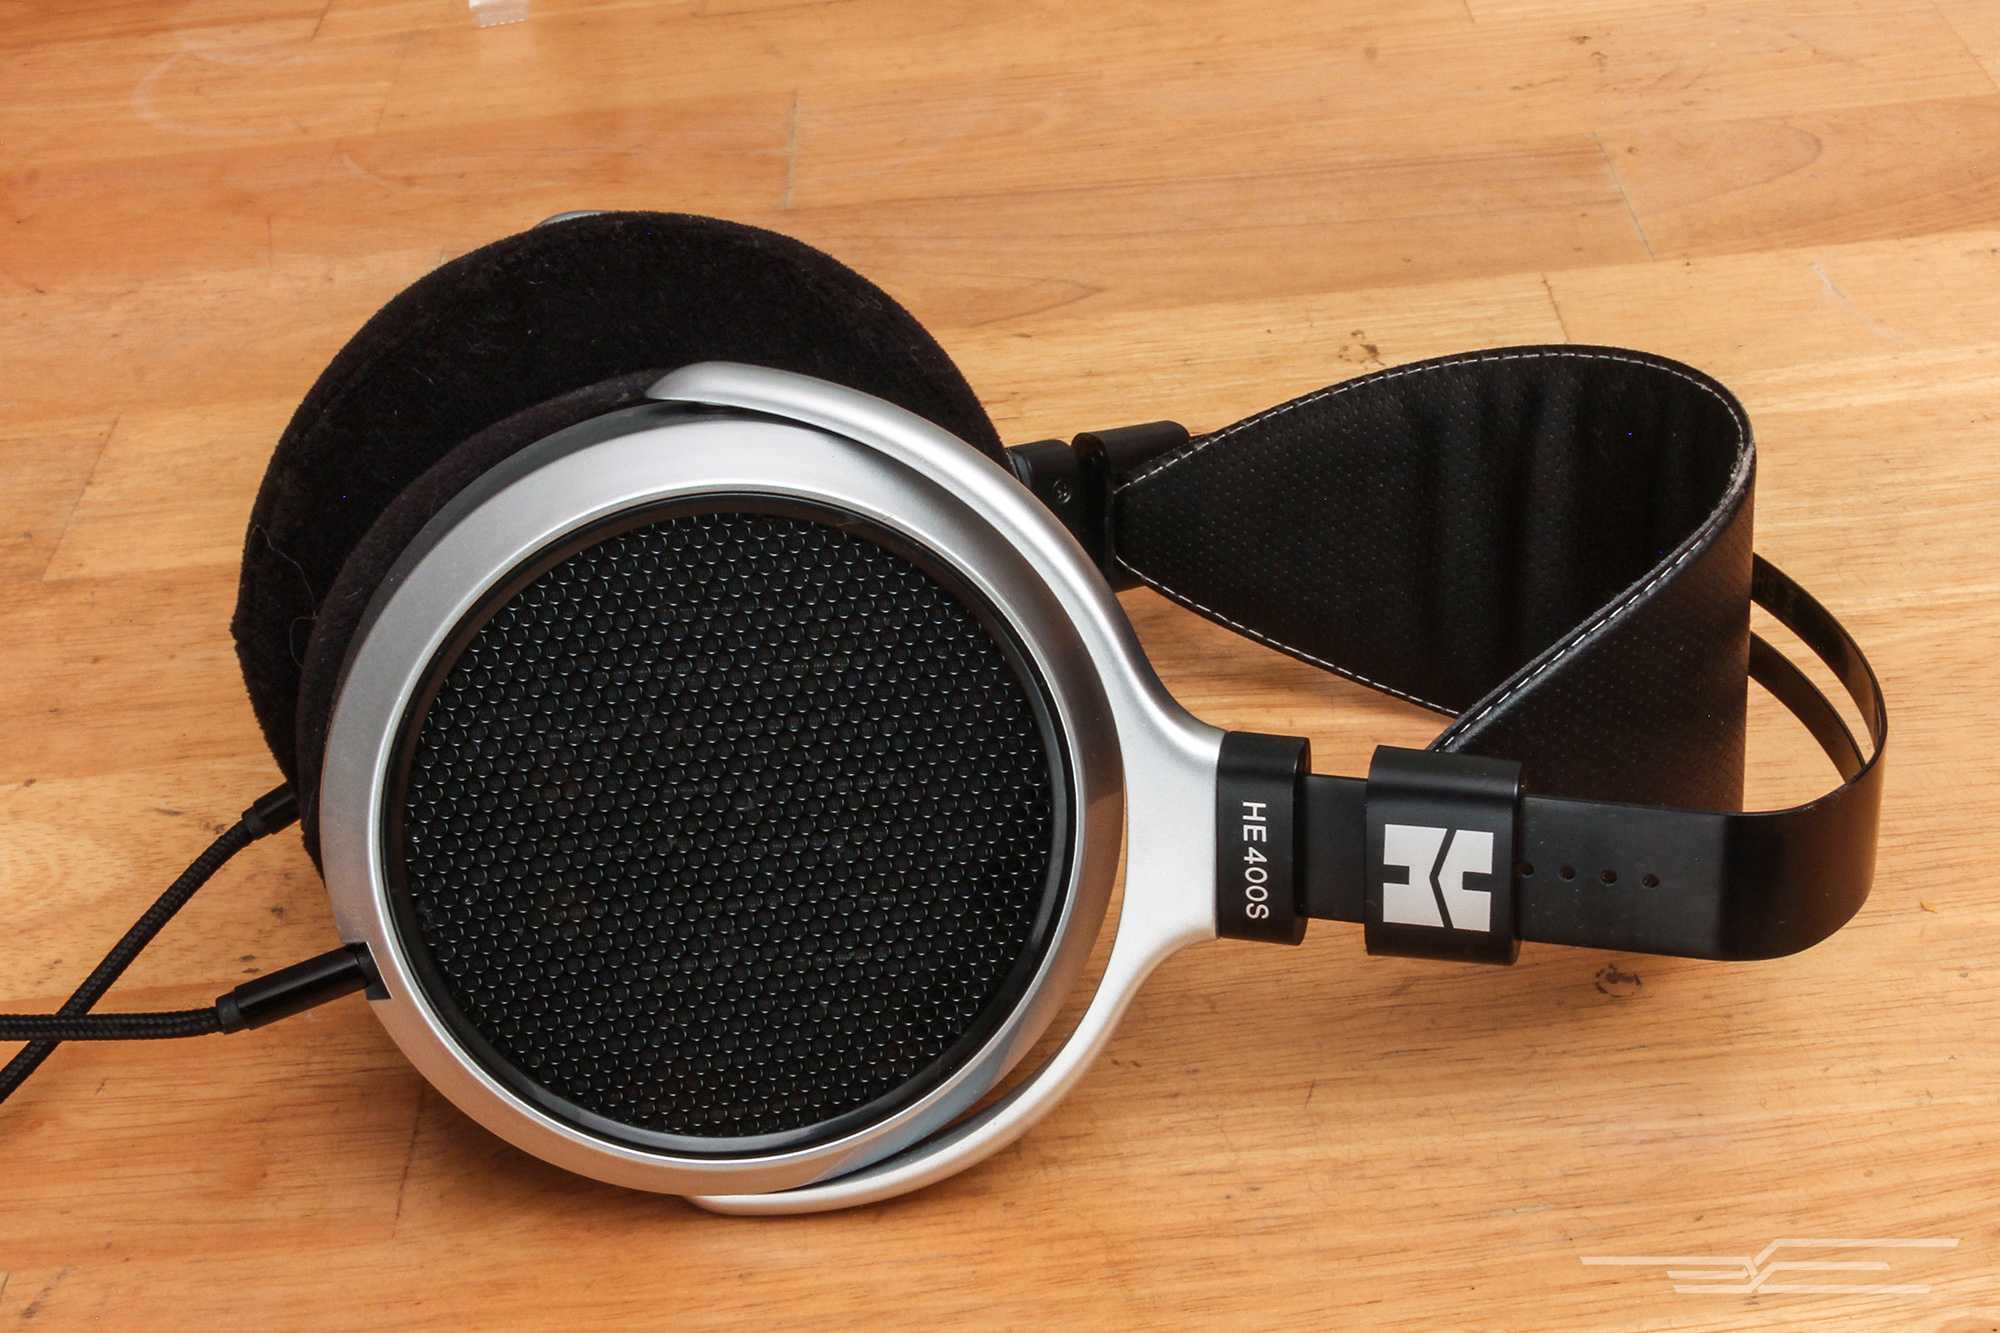 Hifiman he-500 review 2022 - why these sound so good